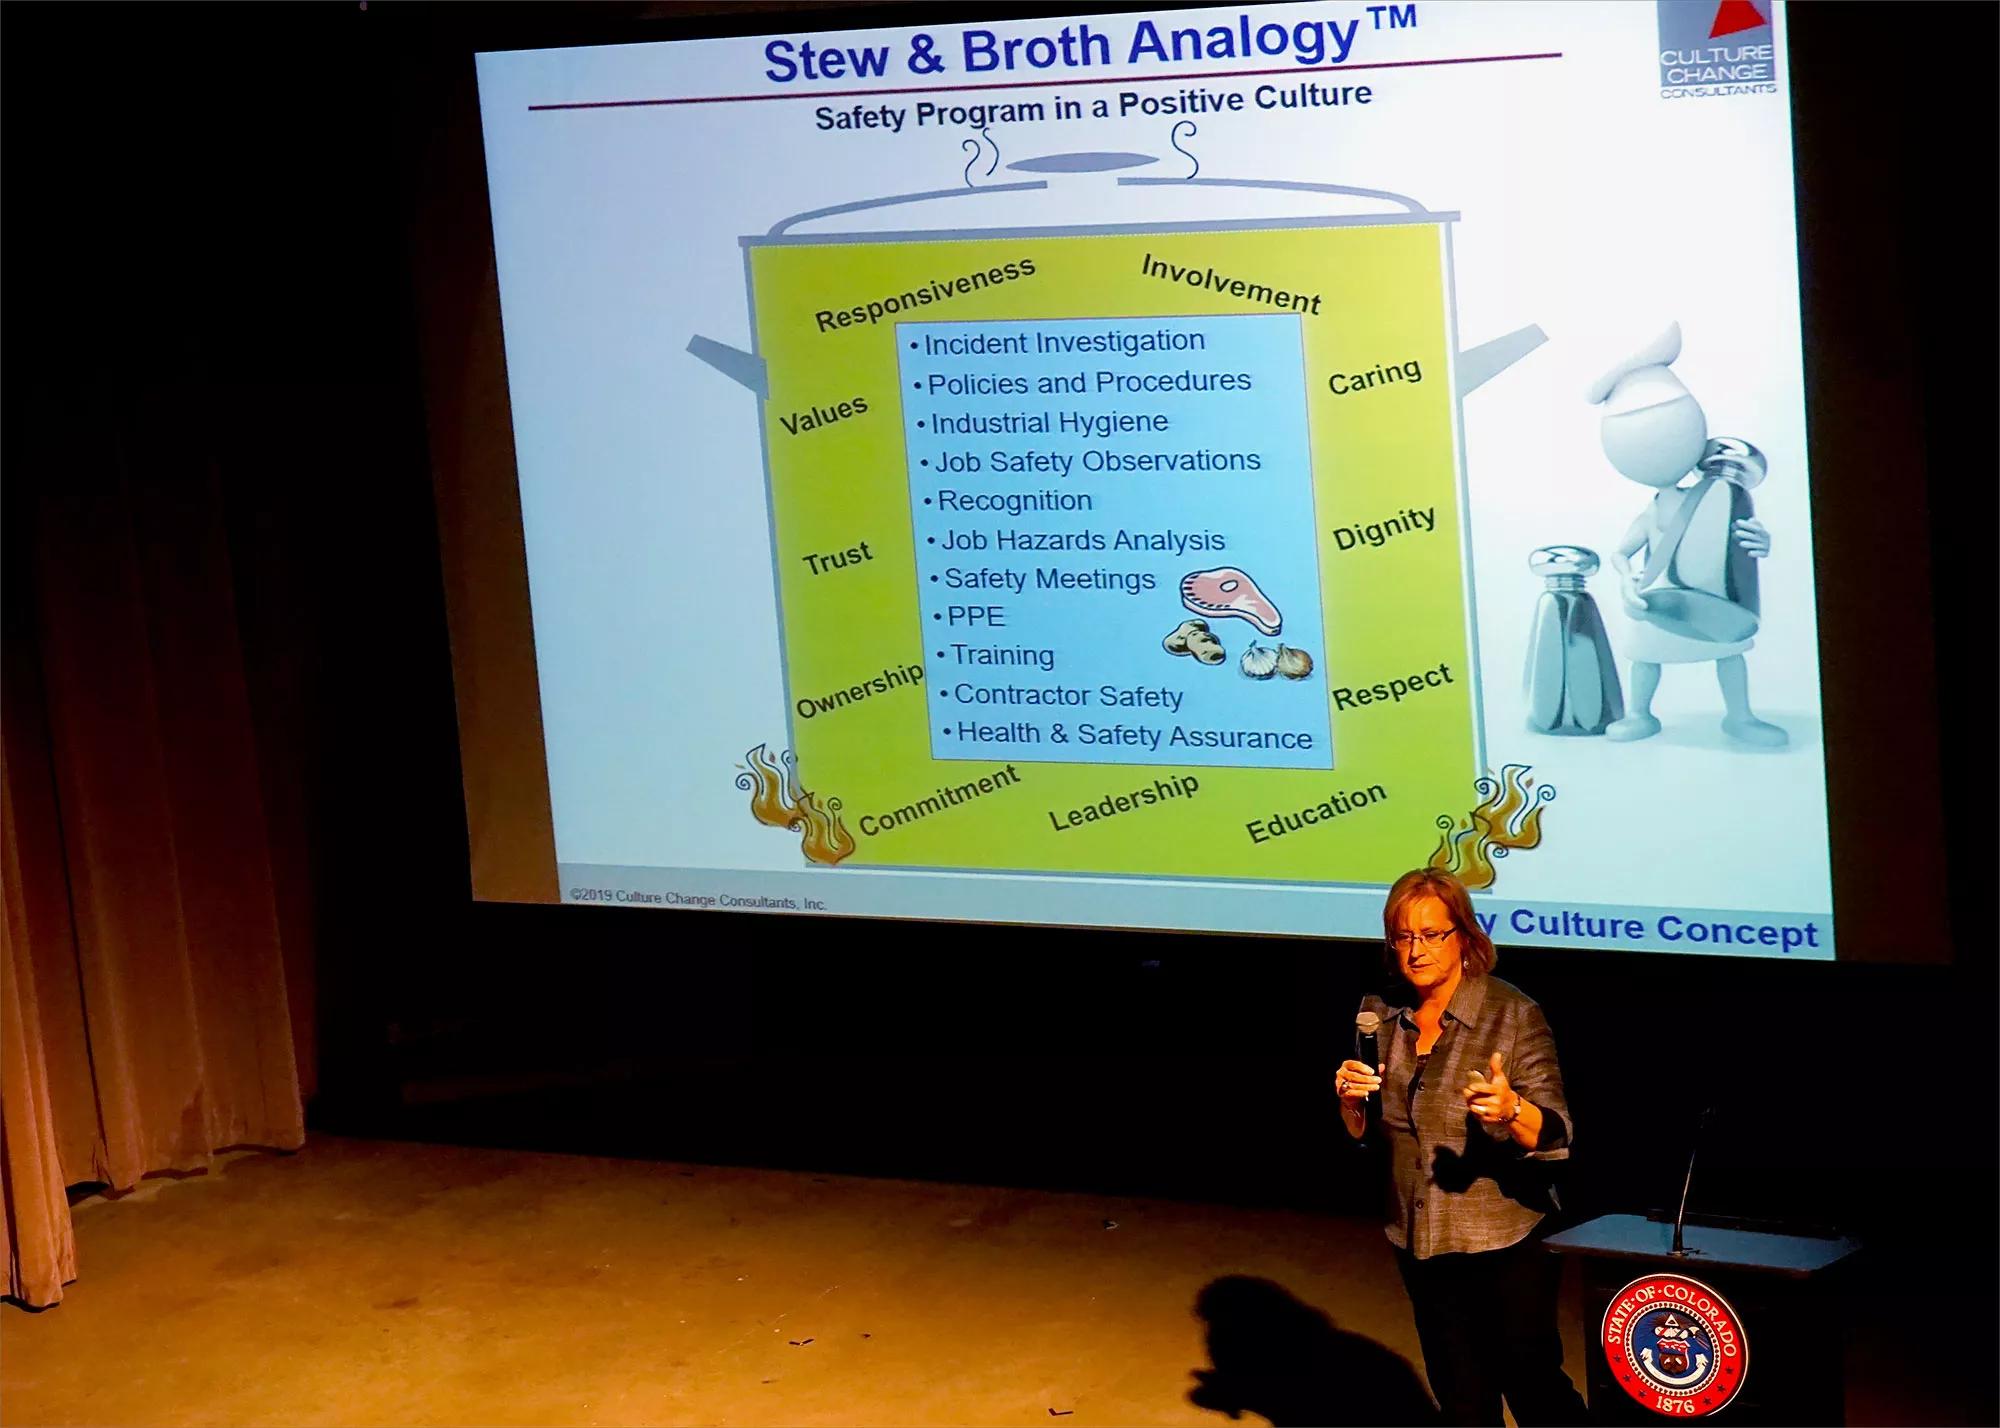 A woman with a microphone speaks in front of a slide about a safety program in a positive culture